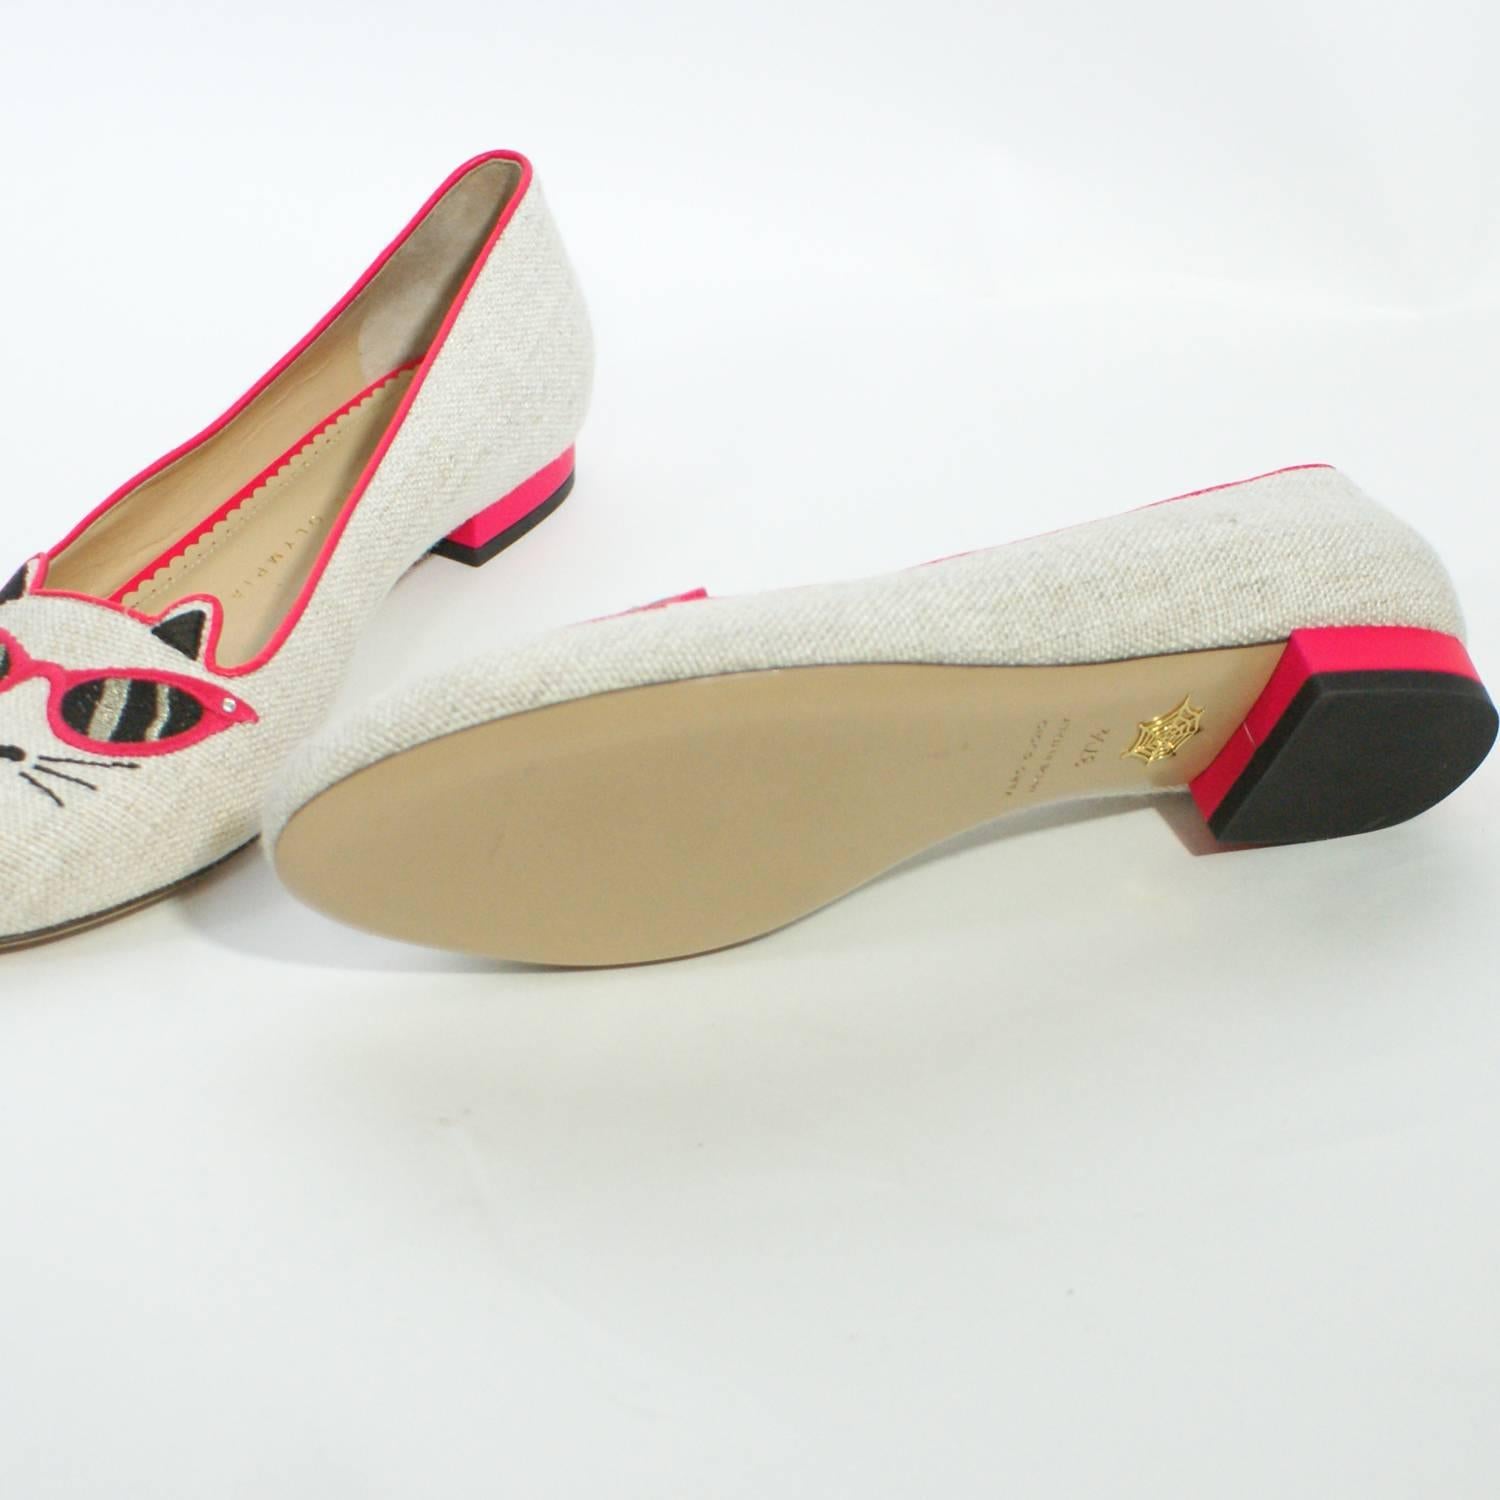 Charlotte Olympia Cat With Sunglasses Loafers  In New Condition For Sale In Narberth, PA